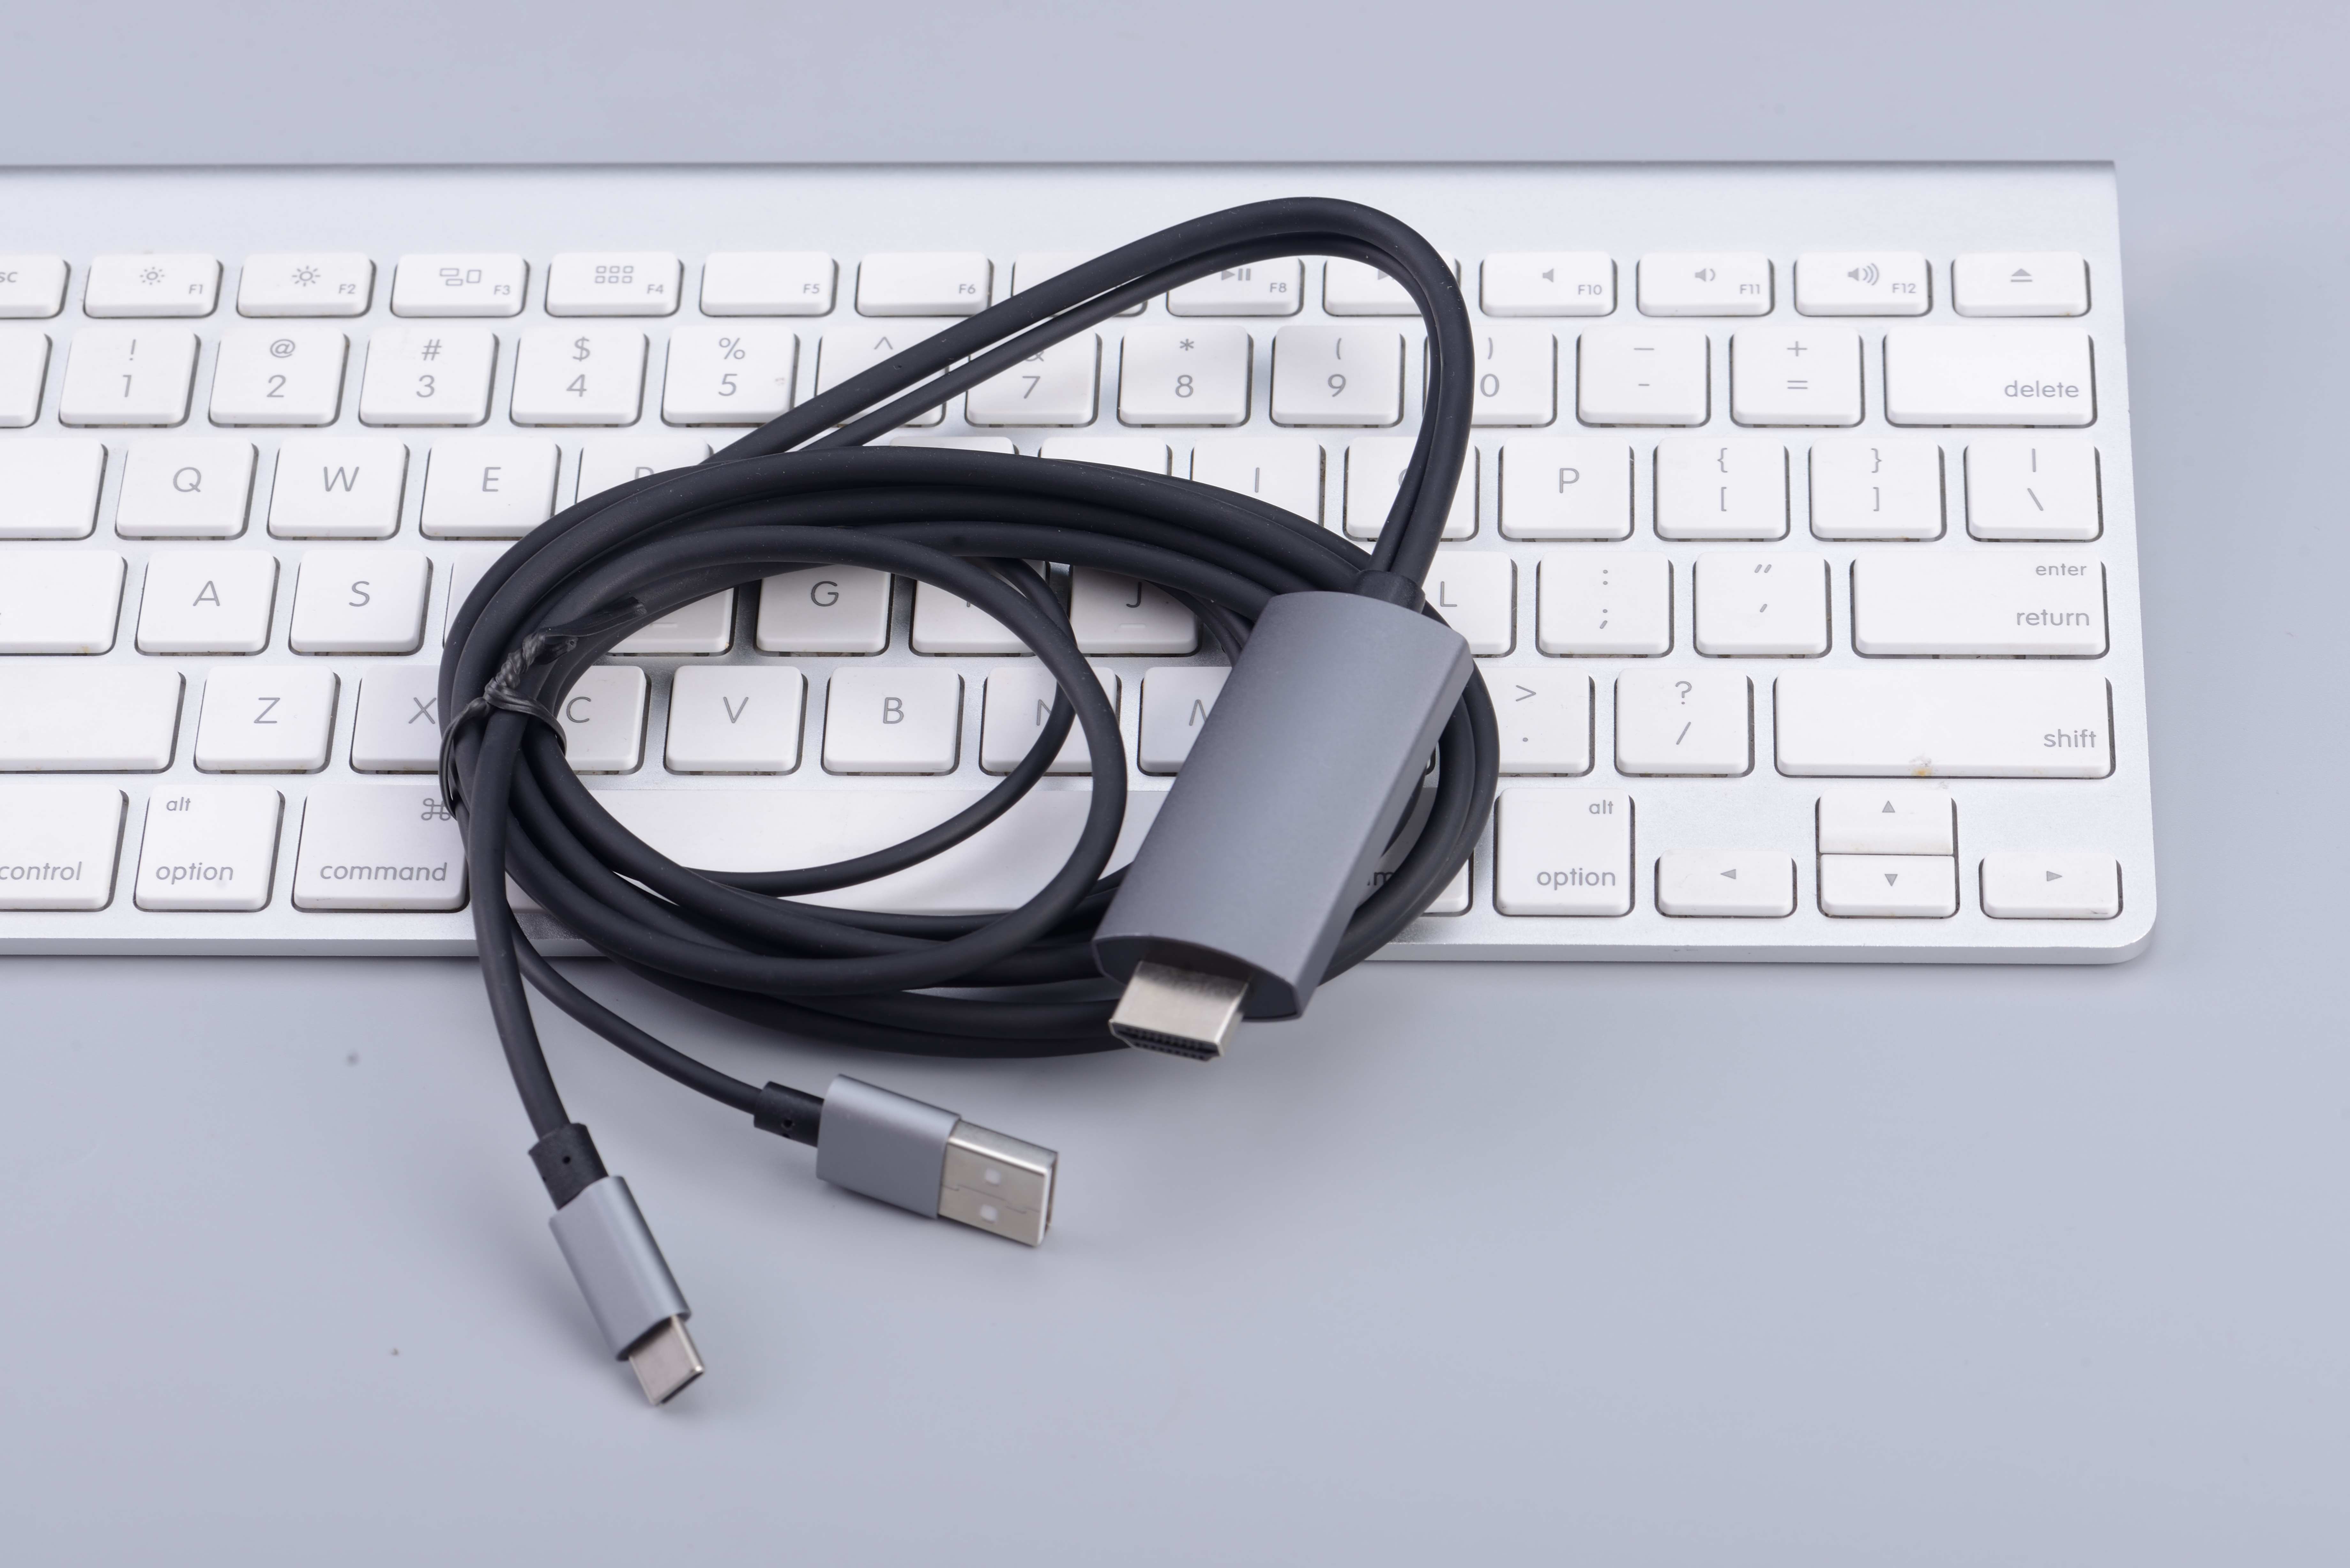 High-end USB C to HDMI 4K @60Hz Type C to HDMI Cable price